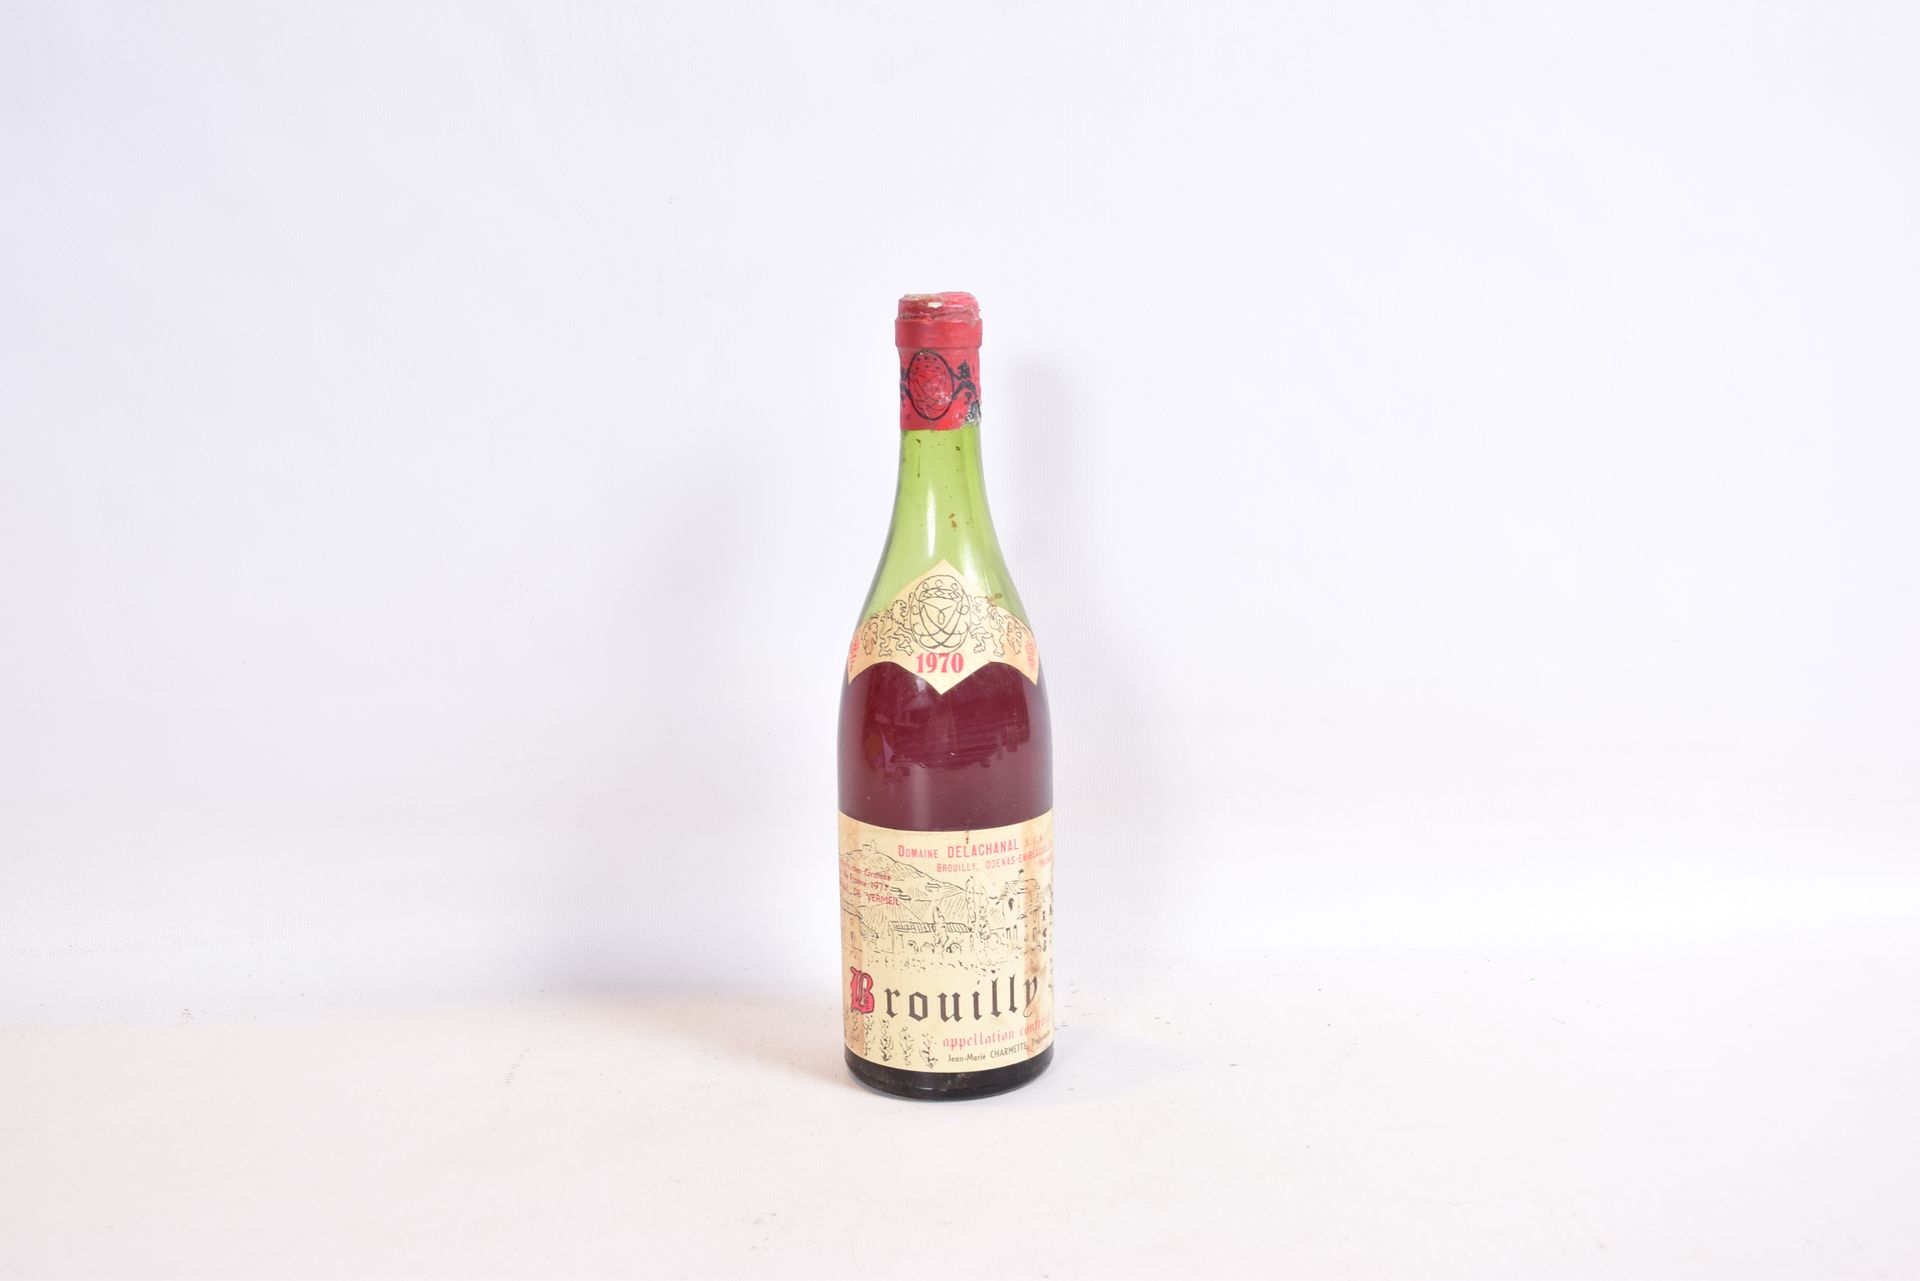 Null 1 BELLE BROUILLY Domaine Delachanal mise Charmette Prop. 1970

	还有。有点褪色和污渍（&hellip;